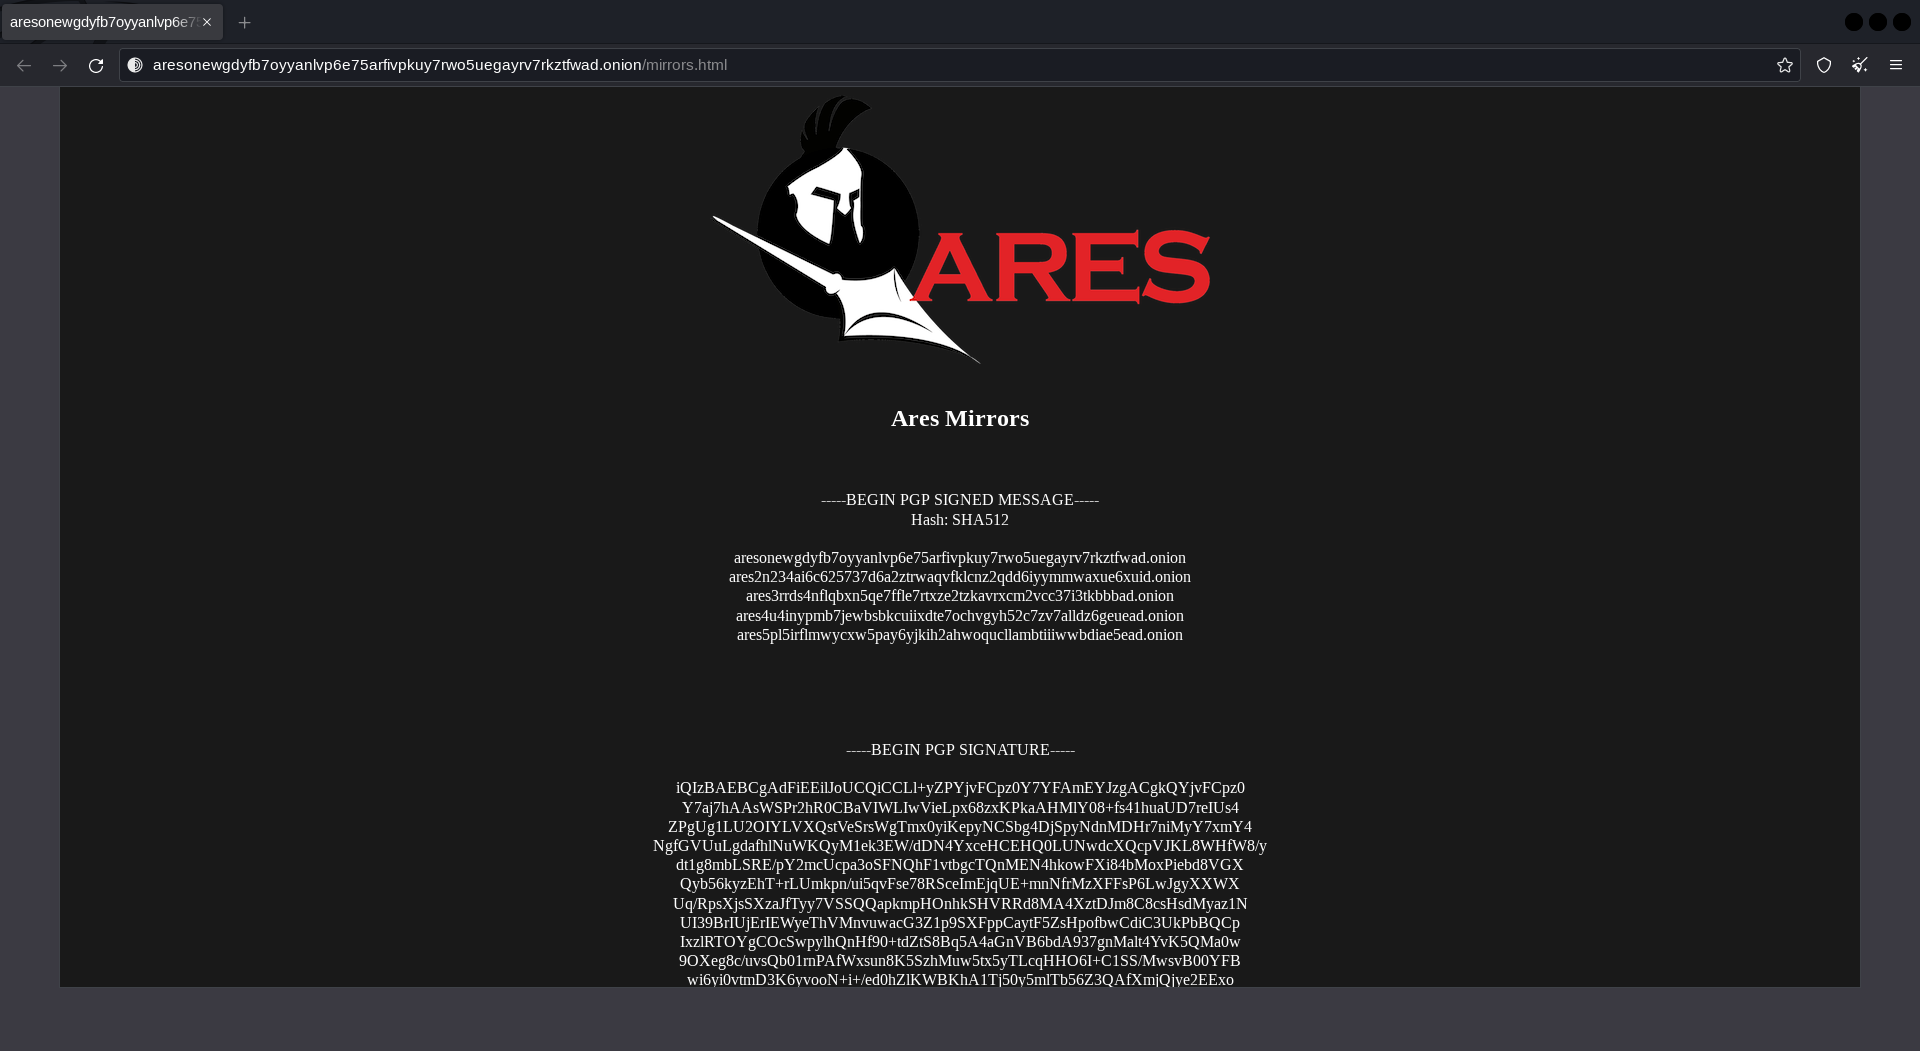 Ares Market Link Ares Url Ares market Onion darknet marketplace